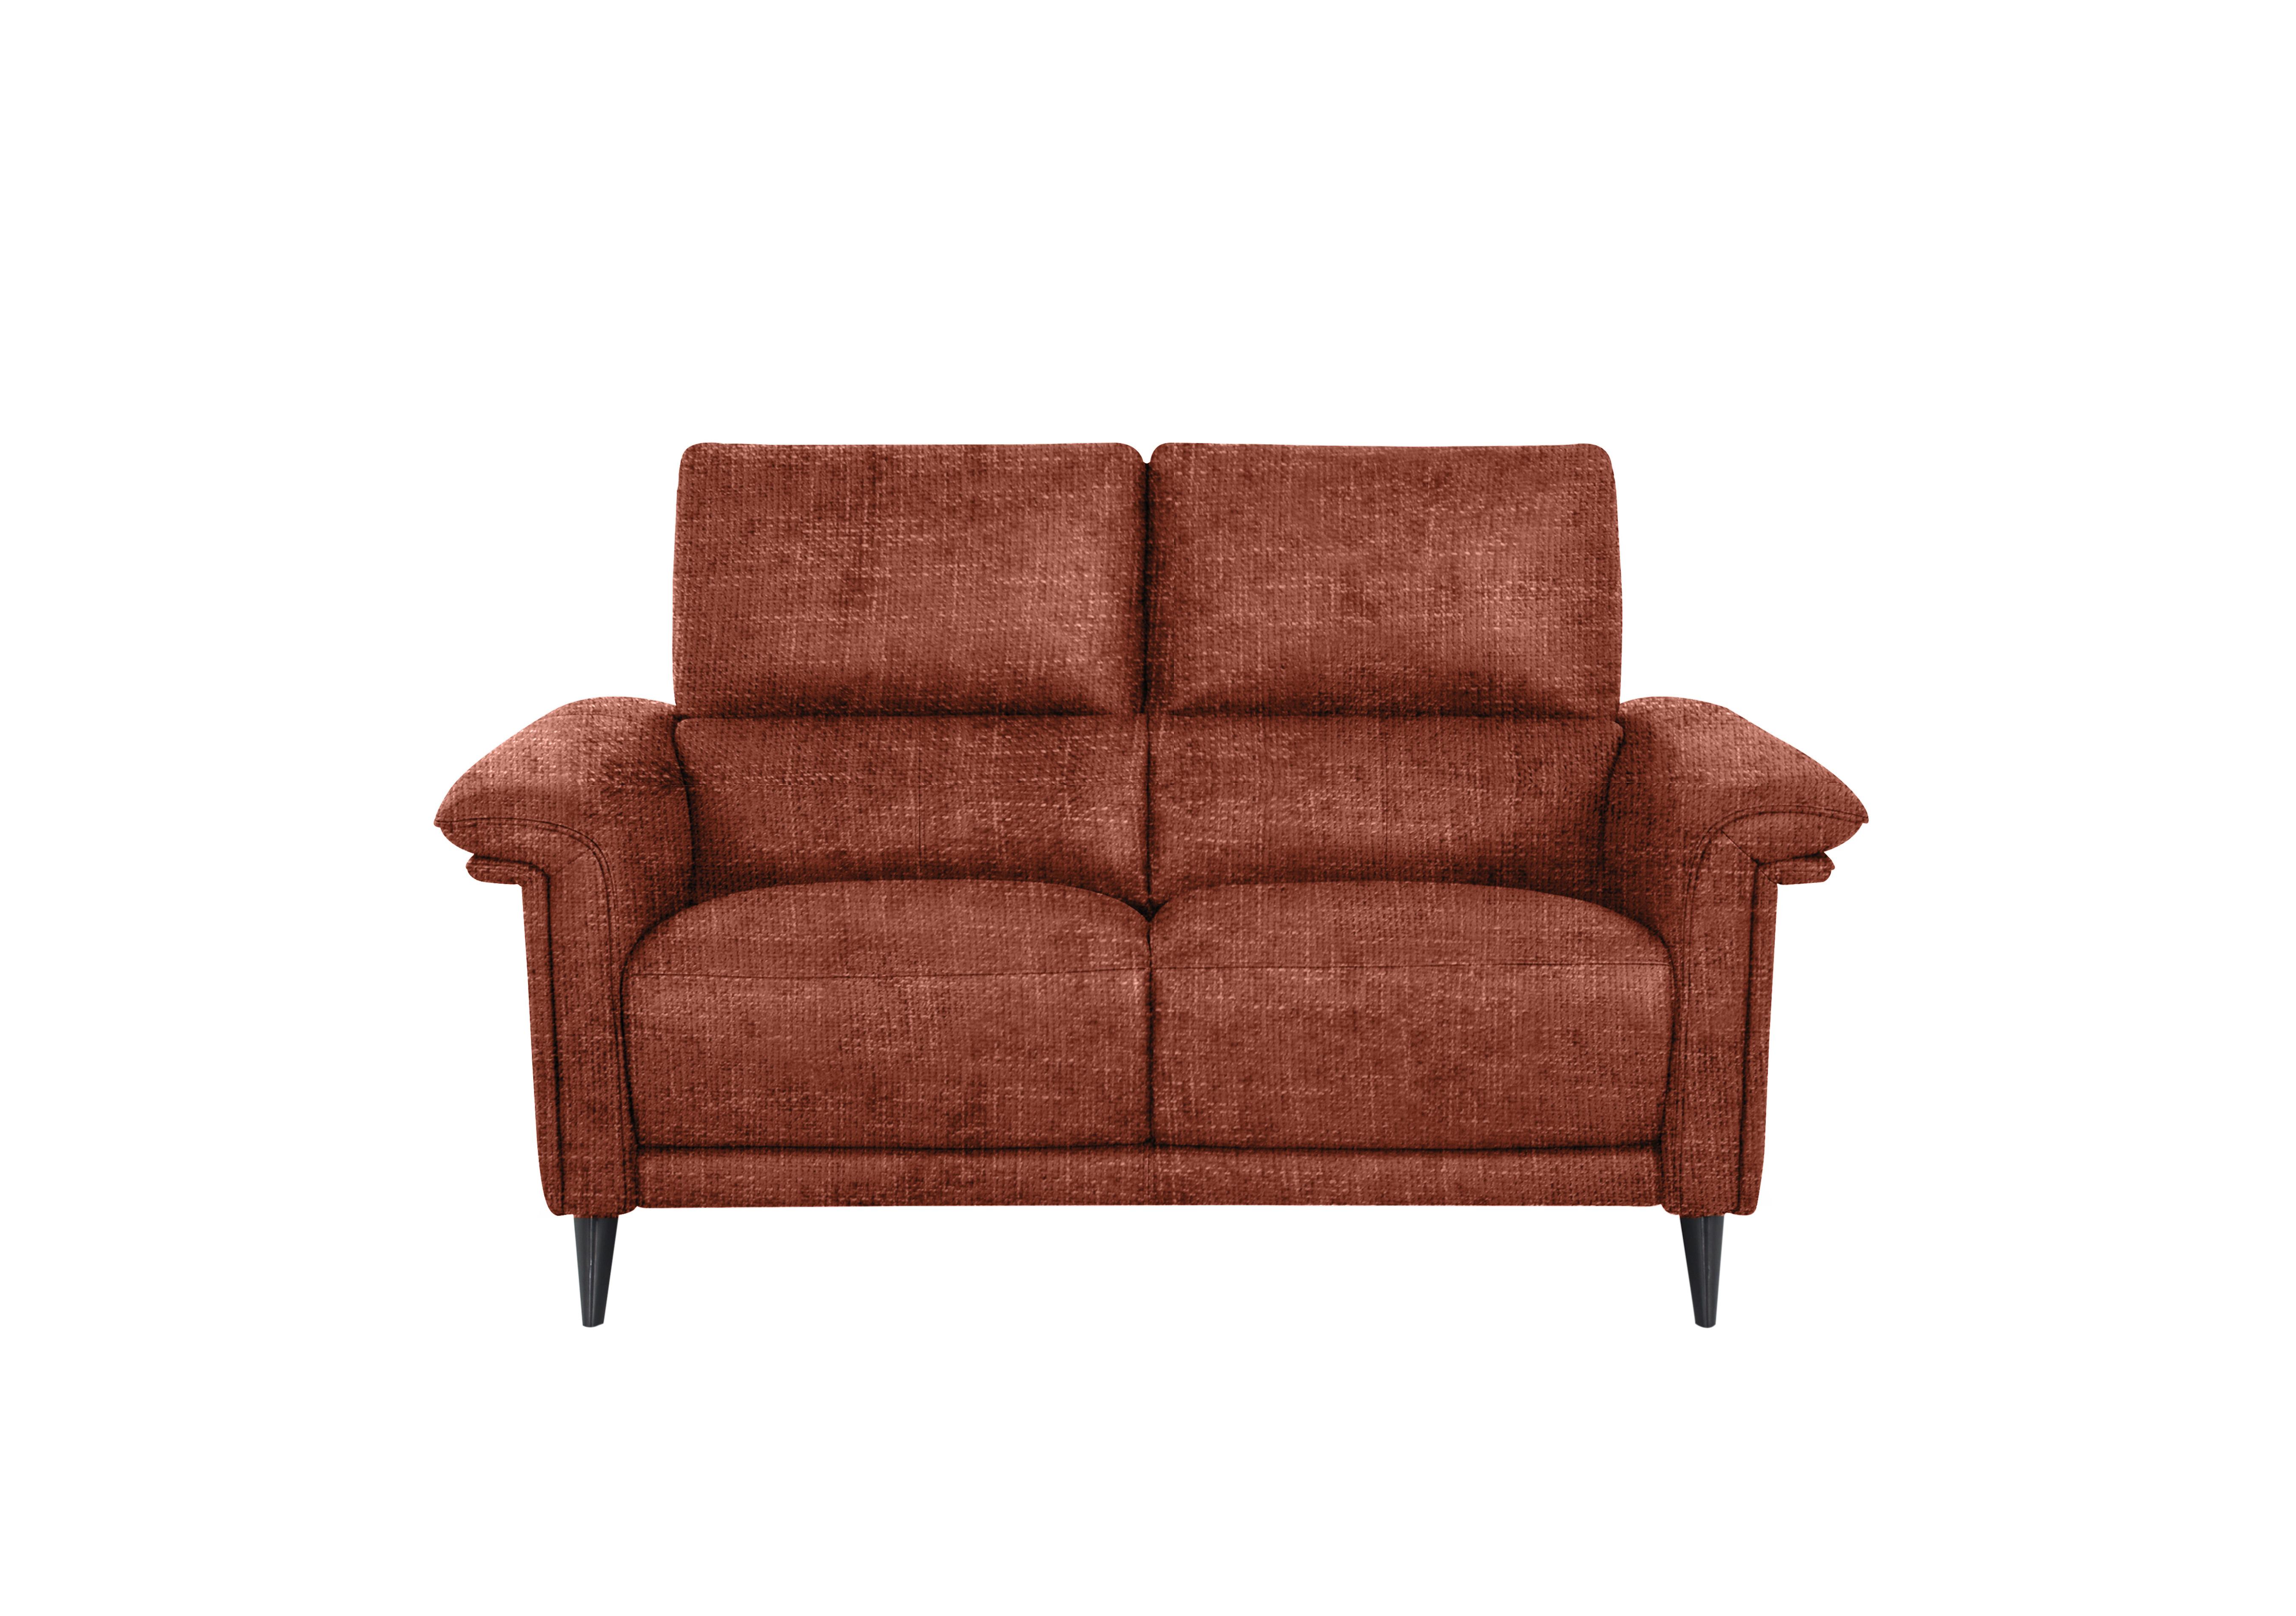 Huxley 2 Seater Fabric Sofa in Fab-Cac-R210 Red Maple on Furniture Village